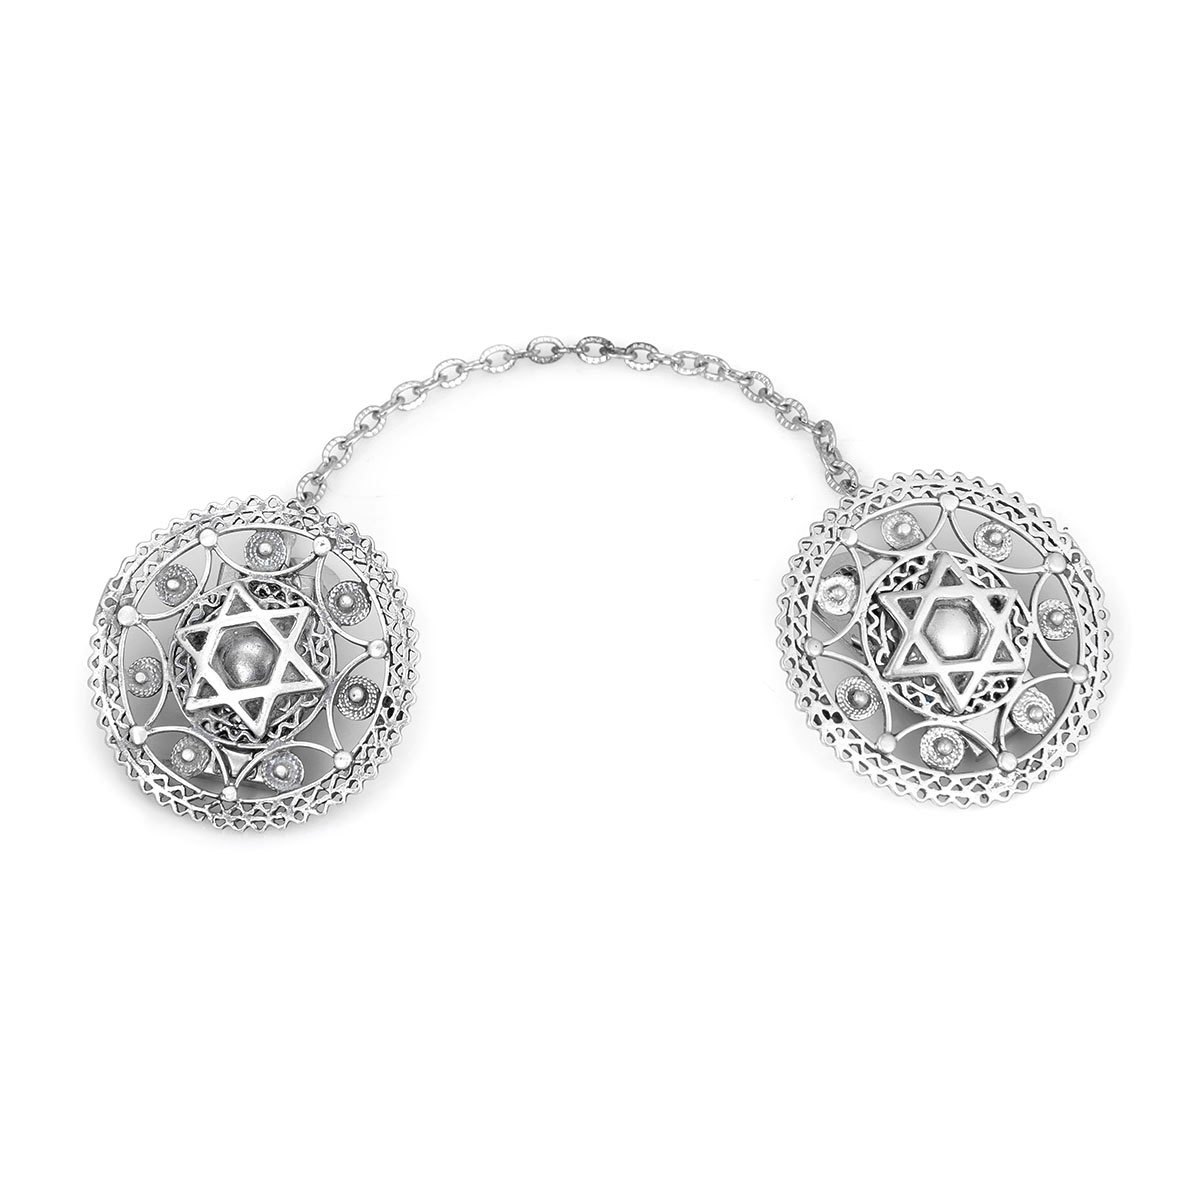 Traditional Yemenite Art Handcrafted Sterling Silver Tallit Clips With Star of David Design - 1